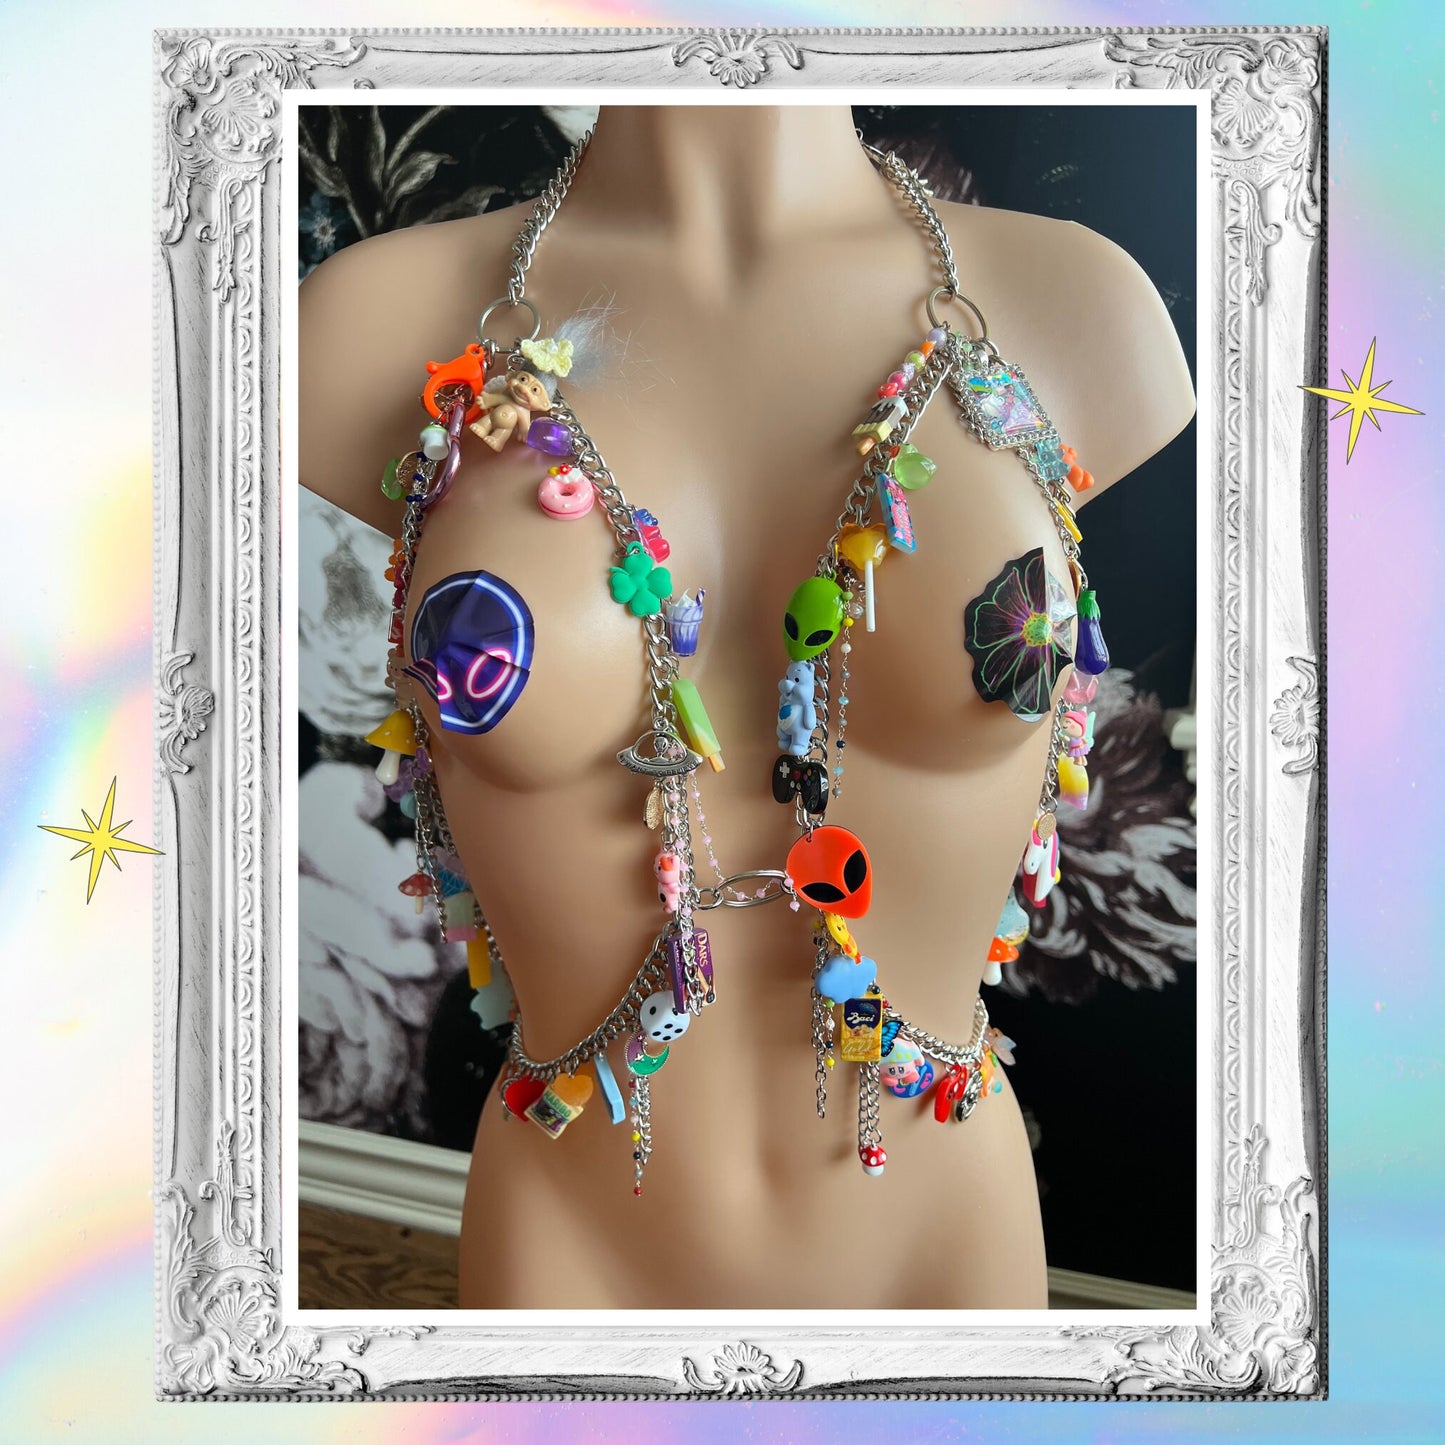 Custom Body Harness Chain Charm Harness Y2k clothing Rave Harness Rave Outfit Festival Outfit EDC Harness Rave Set Charm Rave Outfit